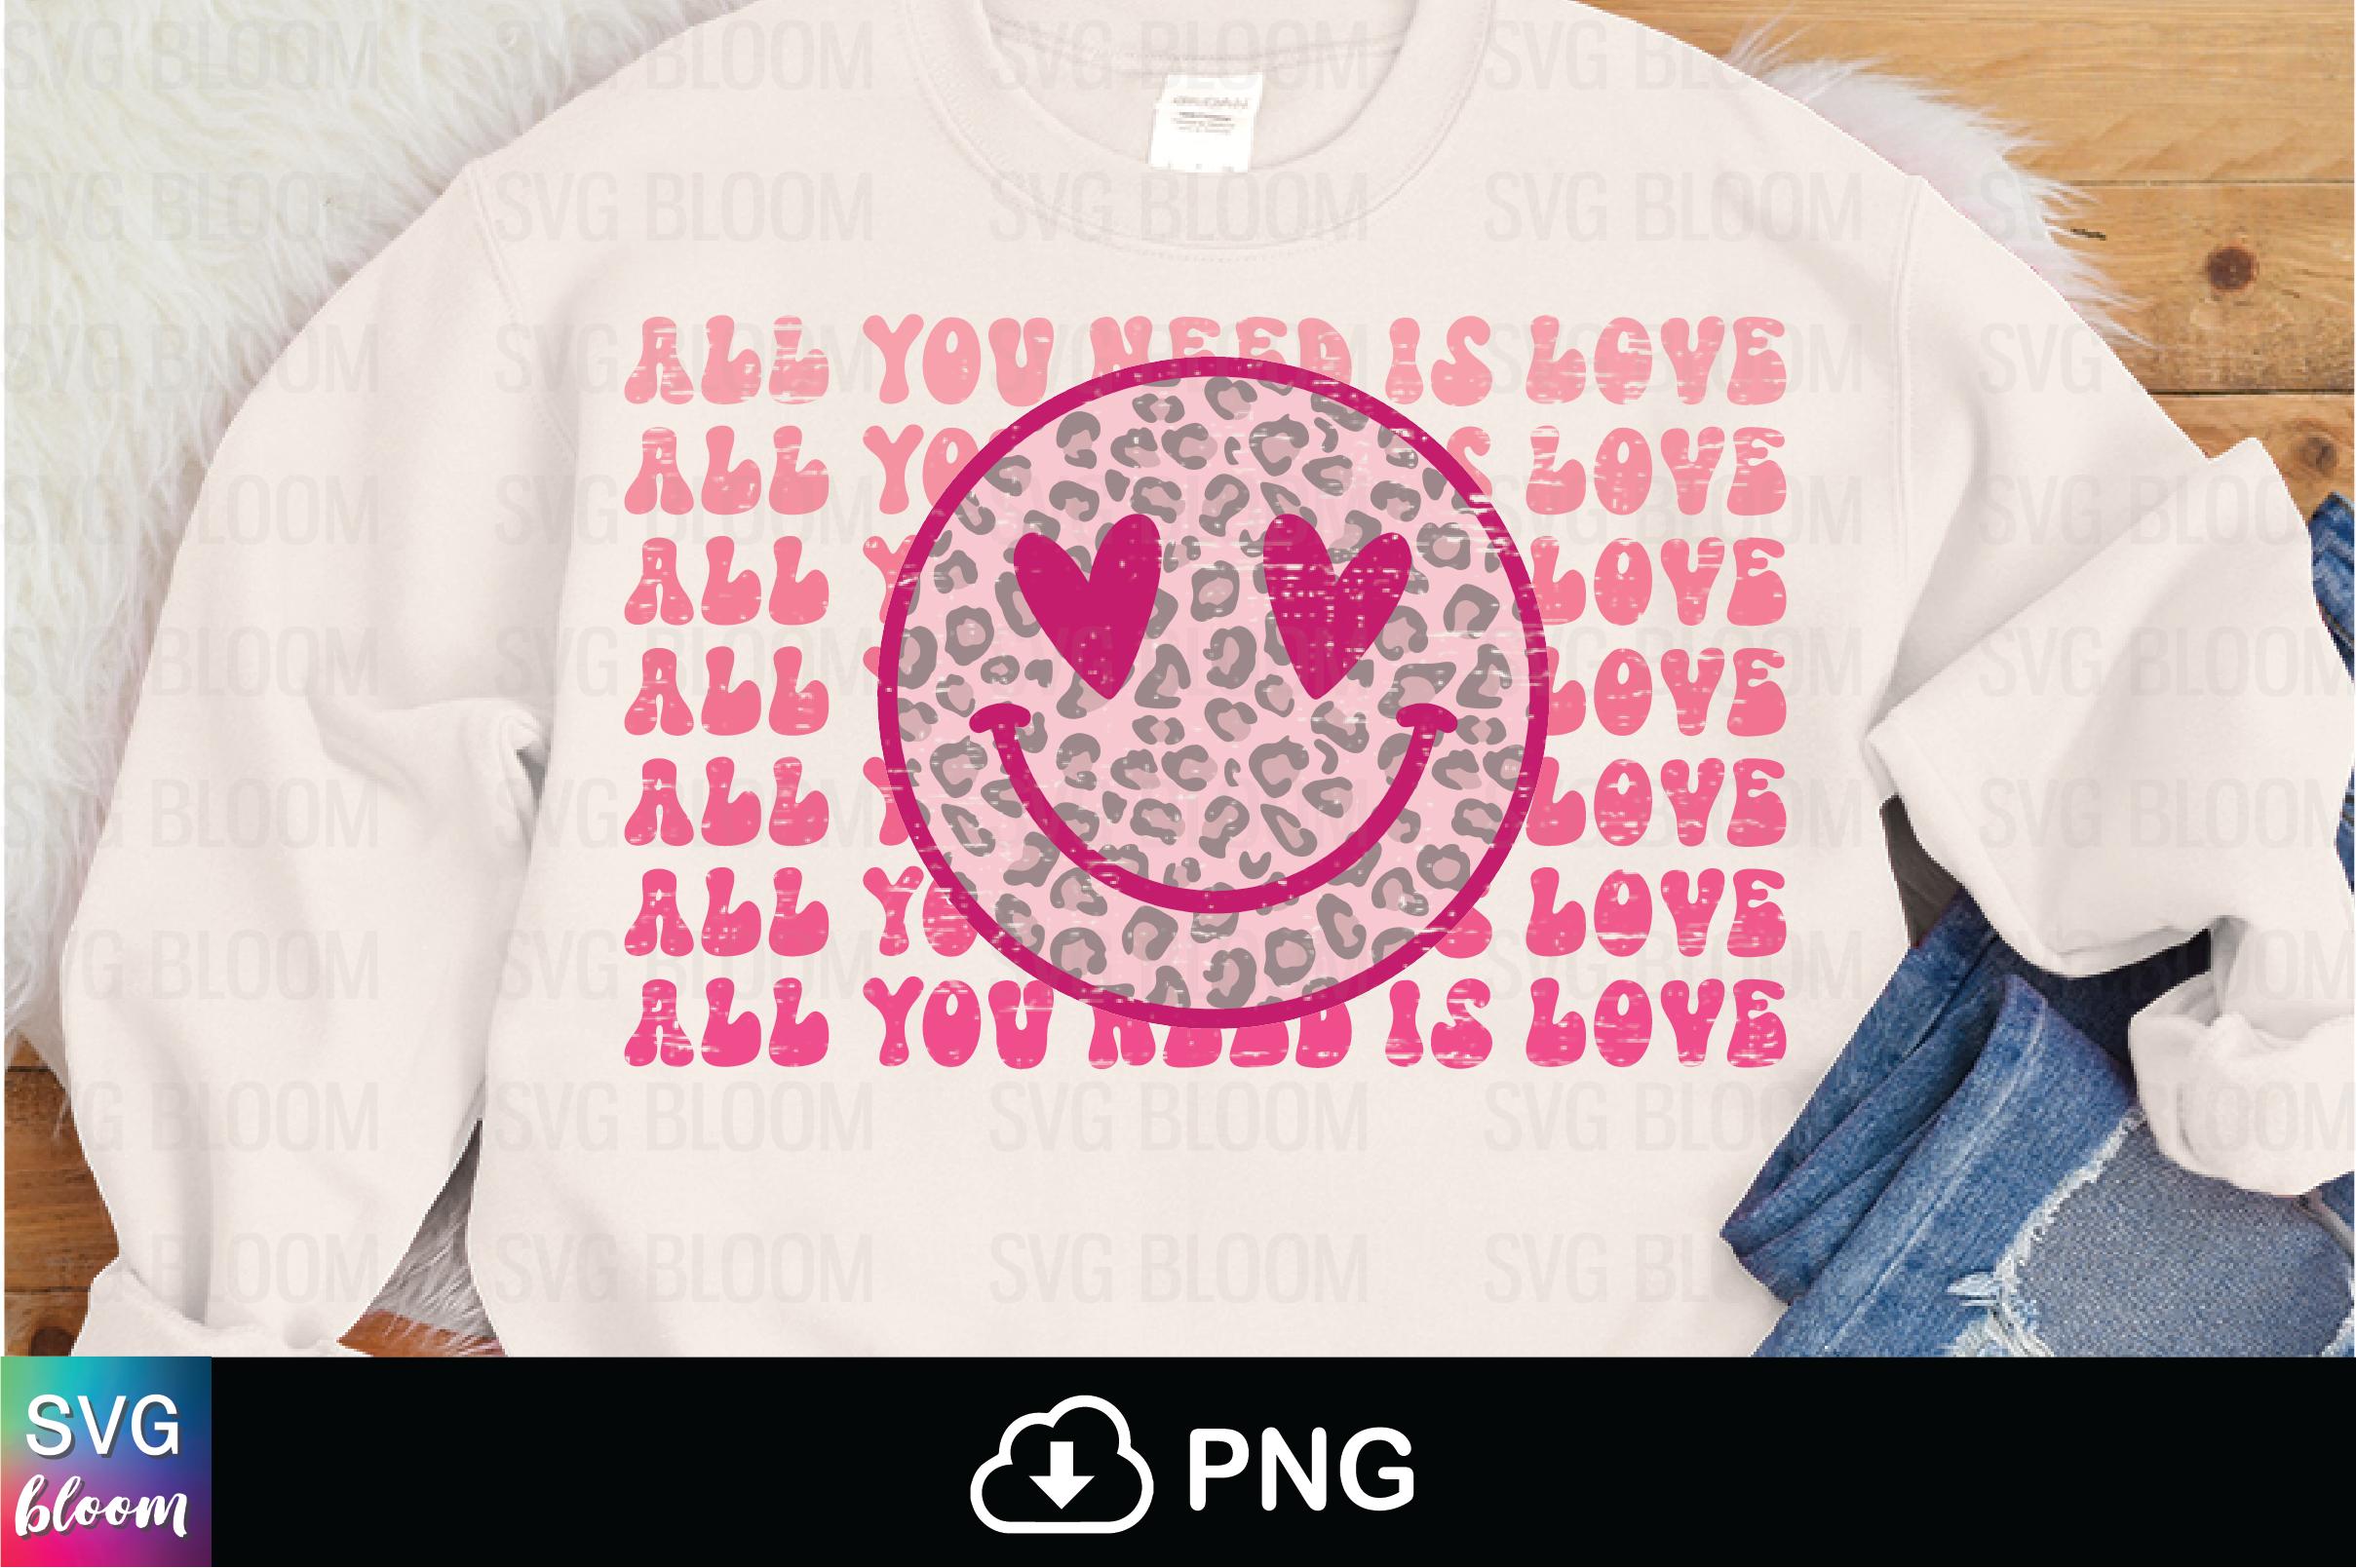 All You Need is Love Leopard Smiley Face